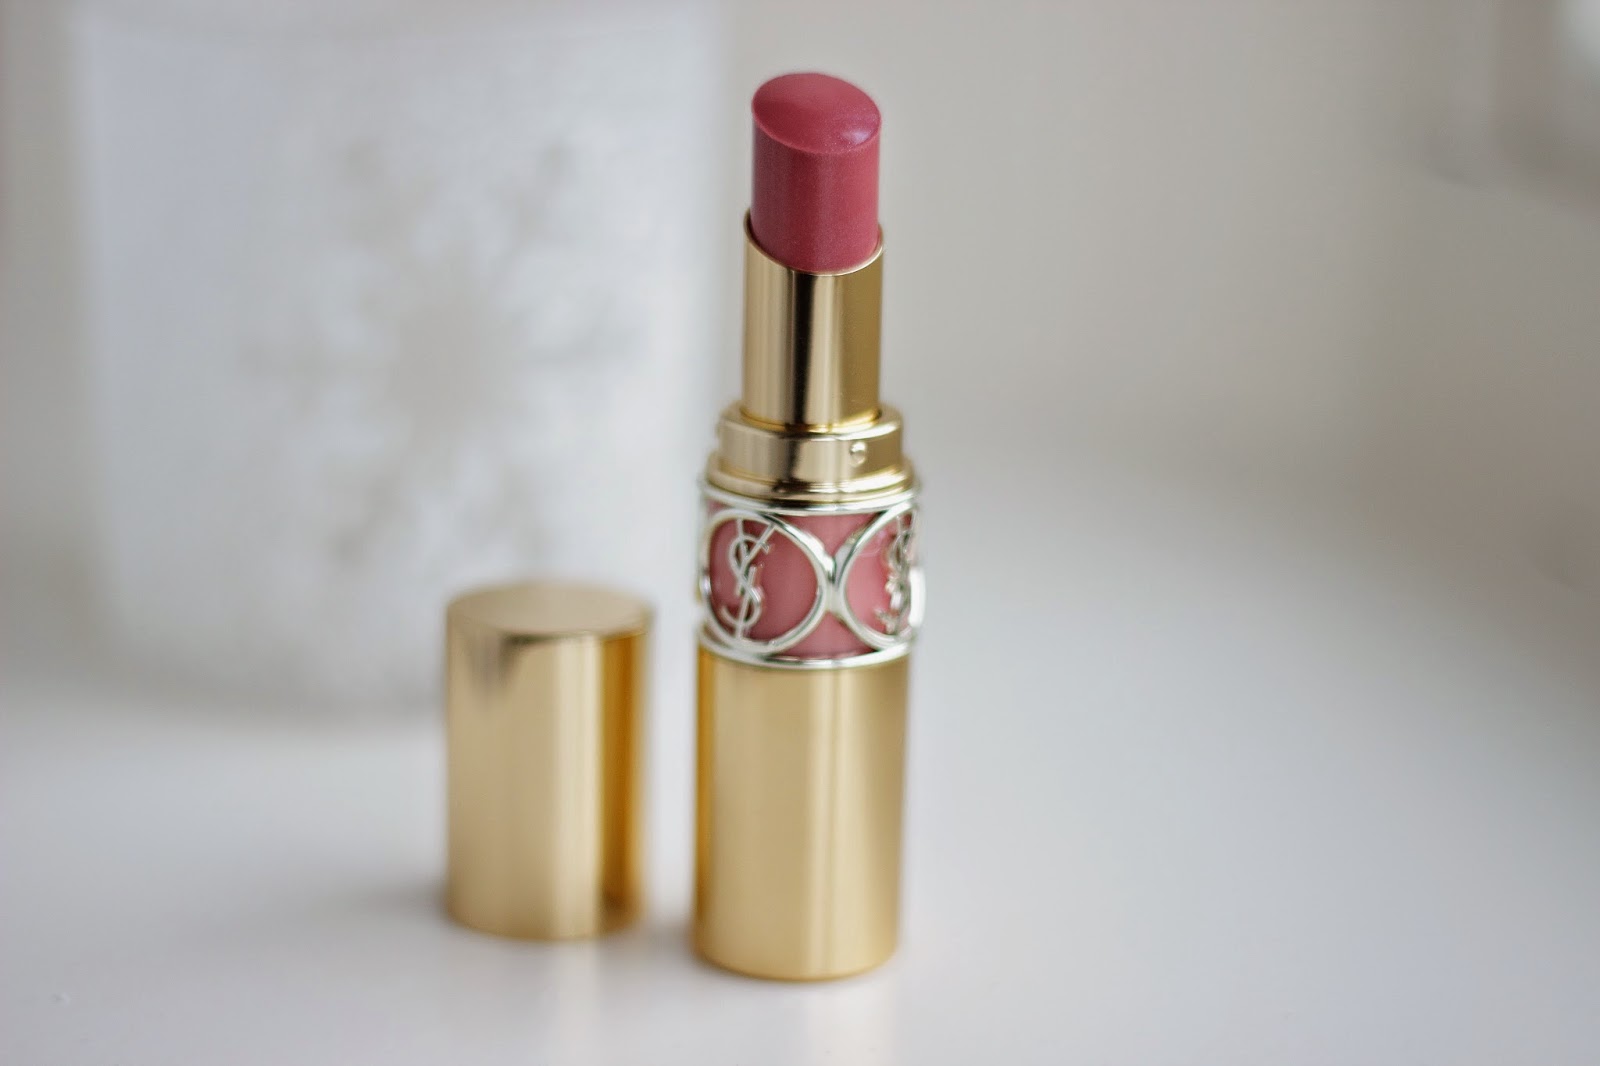 YSL rouge volupté shine 8 pink in confidence